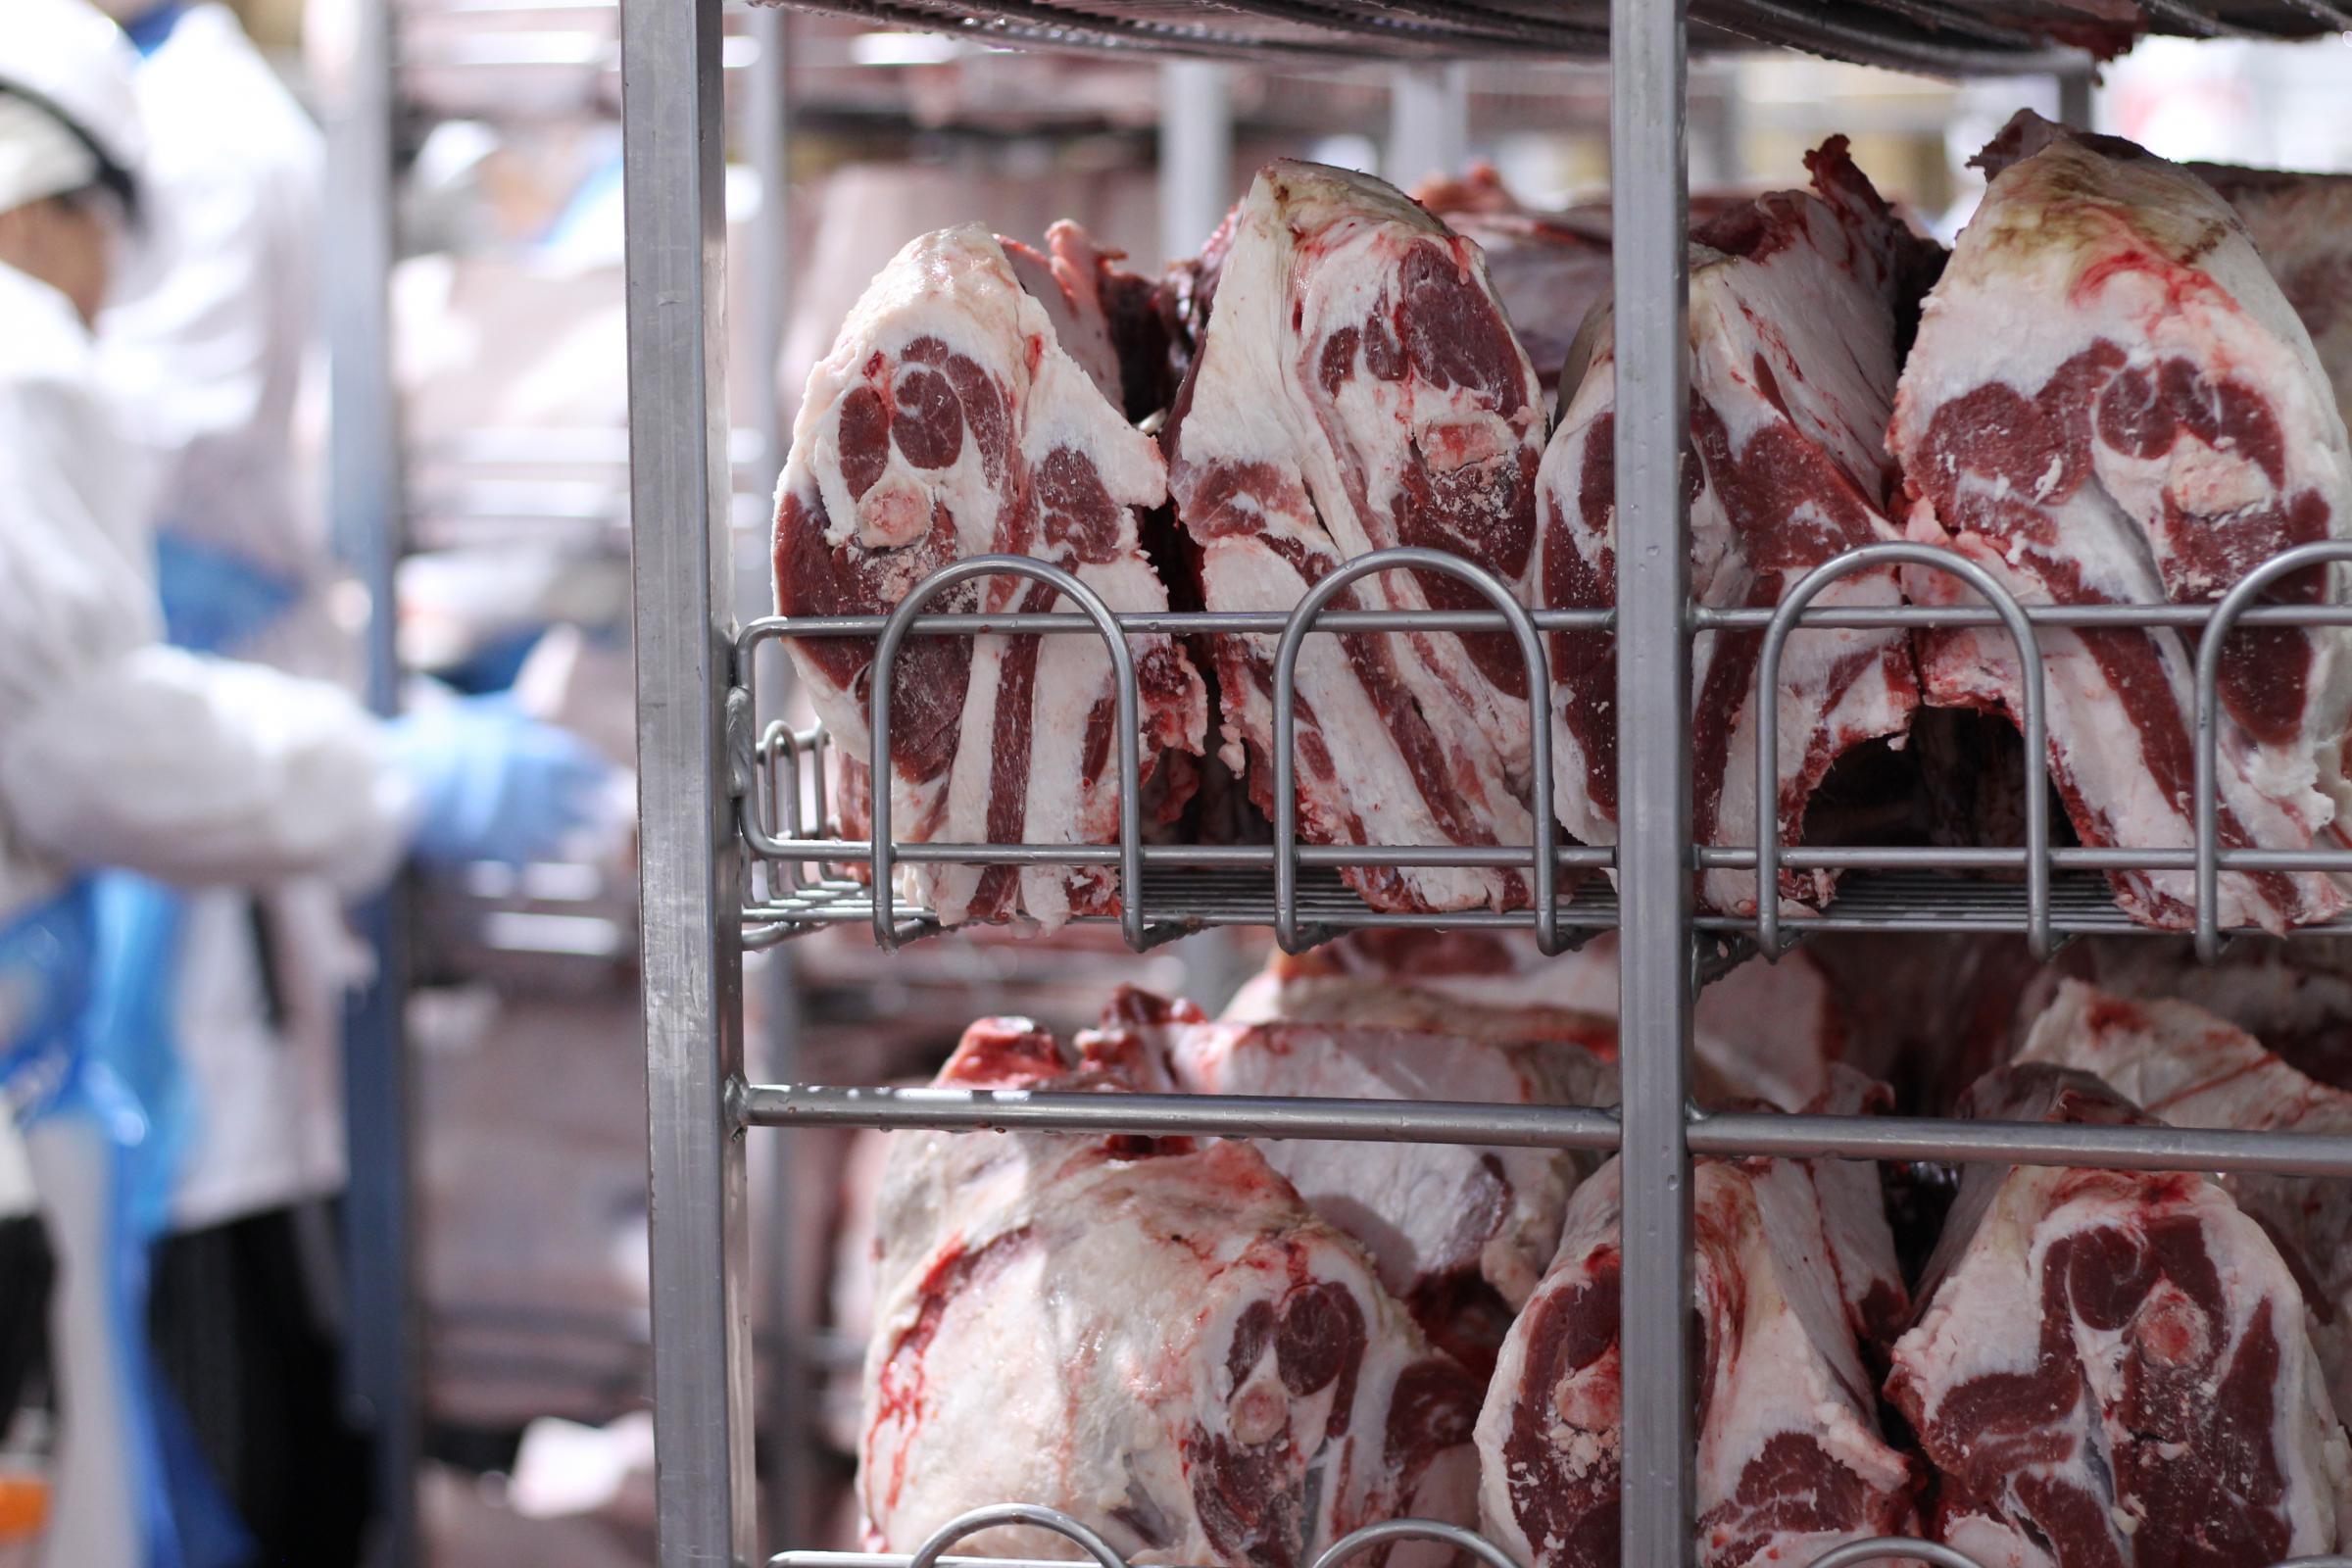 Cuts of halal lamb shoulder sit on a shelf at the Superior Farms plant in Denver, waiting to be sold to small speciality stores that cater to Muslim consumers.